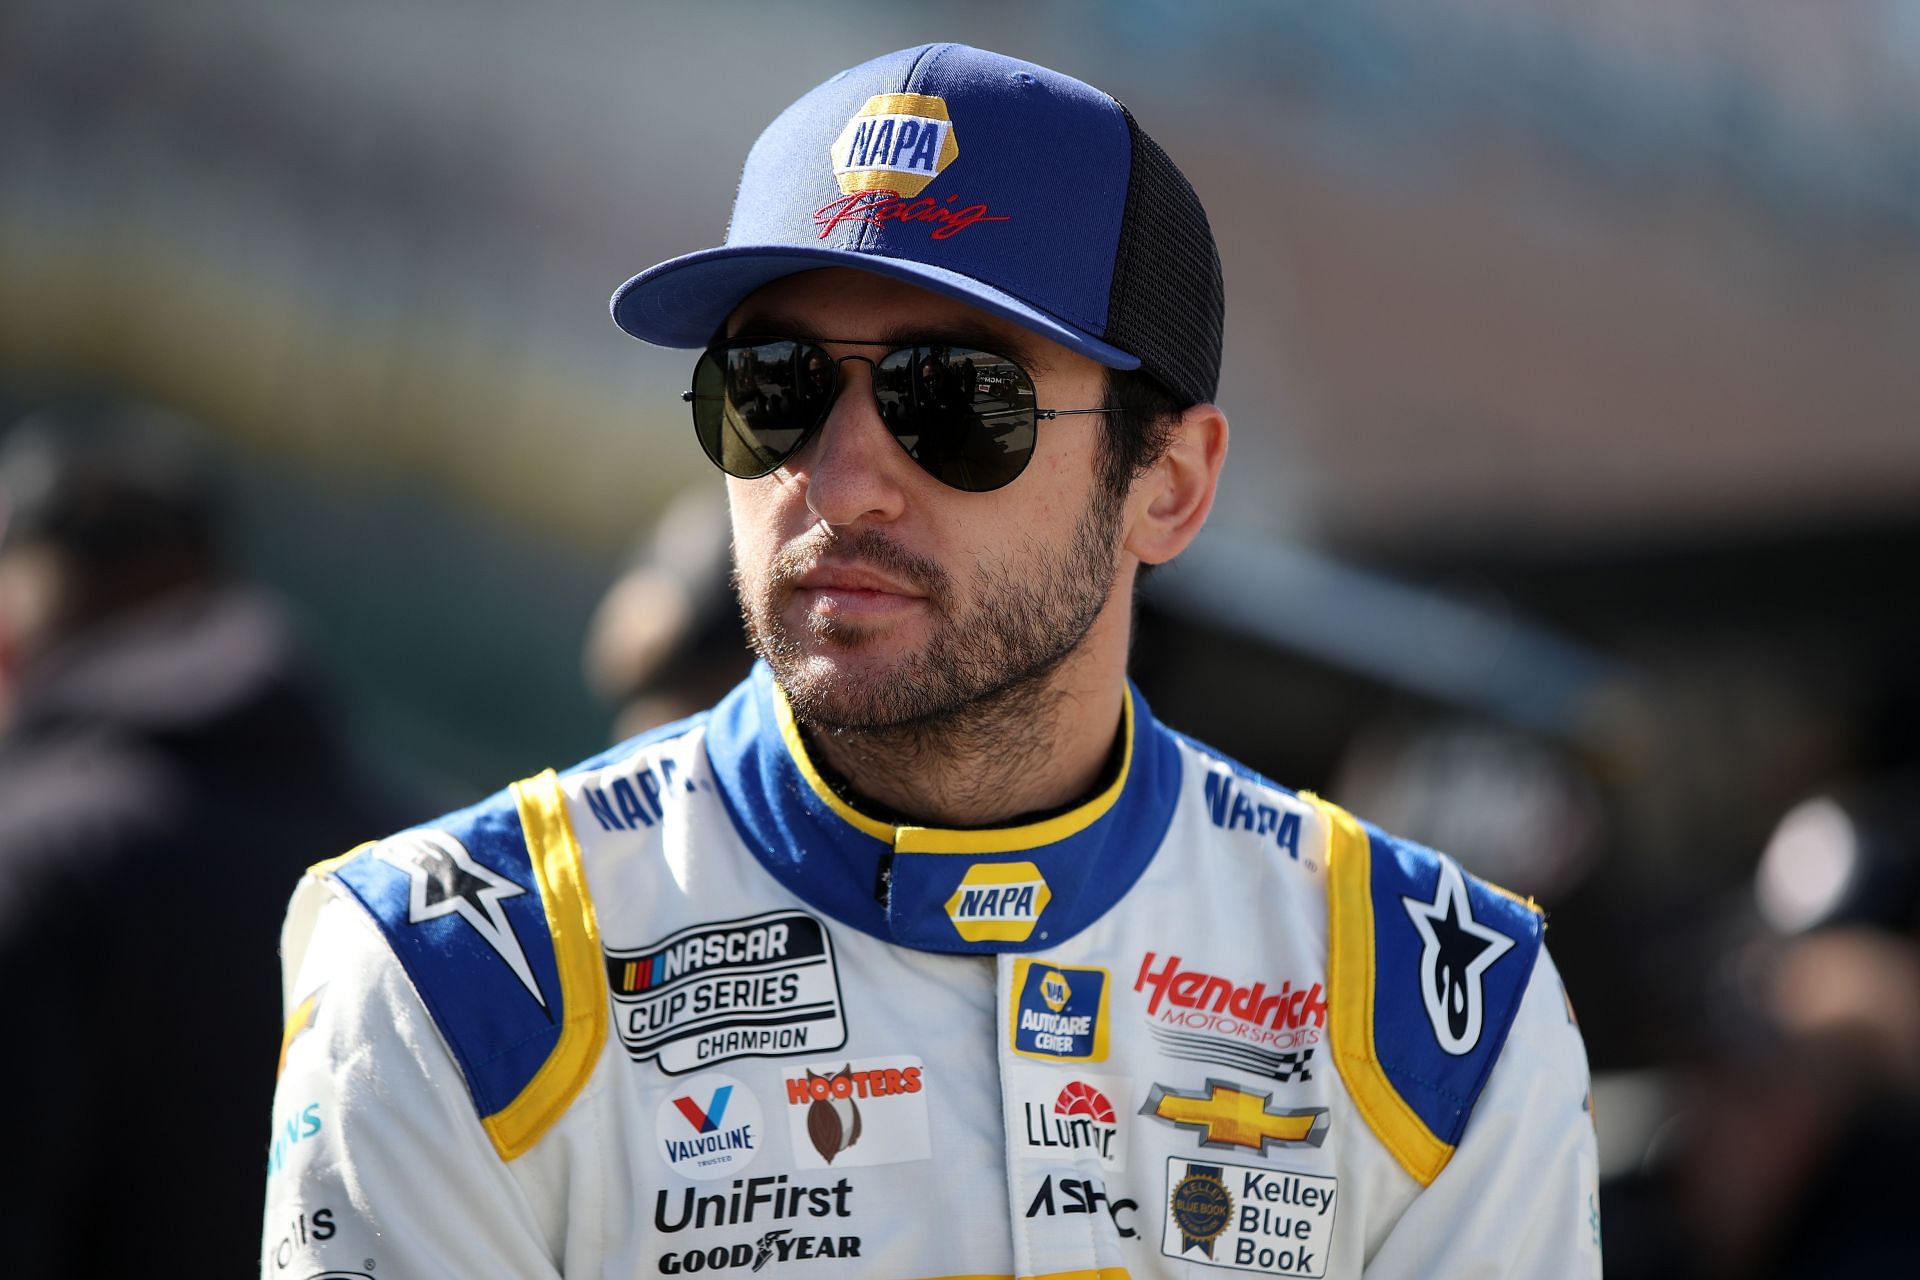 Chase Elliott waits on the grid during practice for NASCAR Cup Series Pennzoil 400 at Las Vegas Motor Speedway